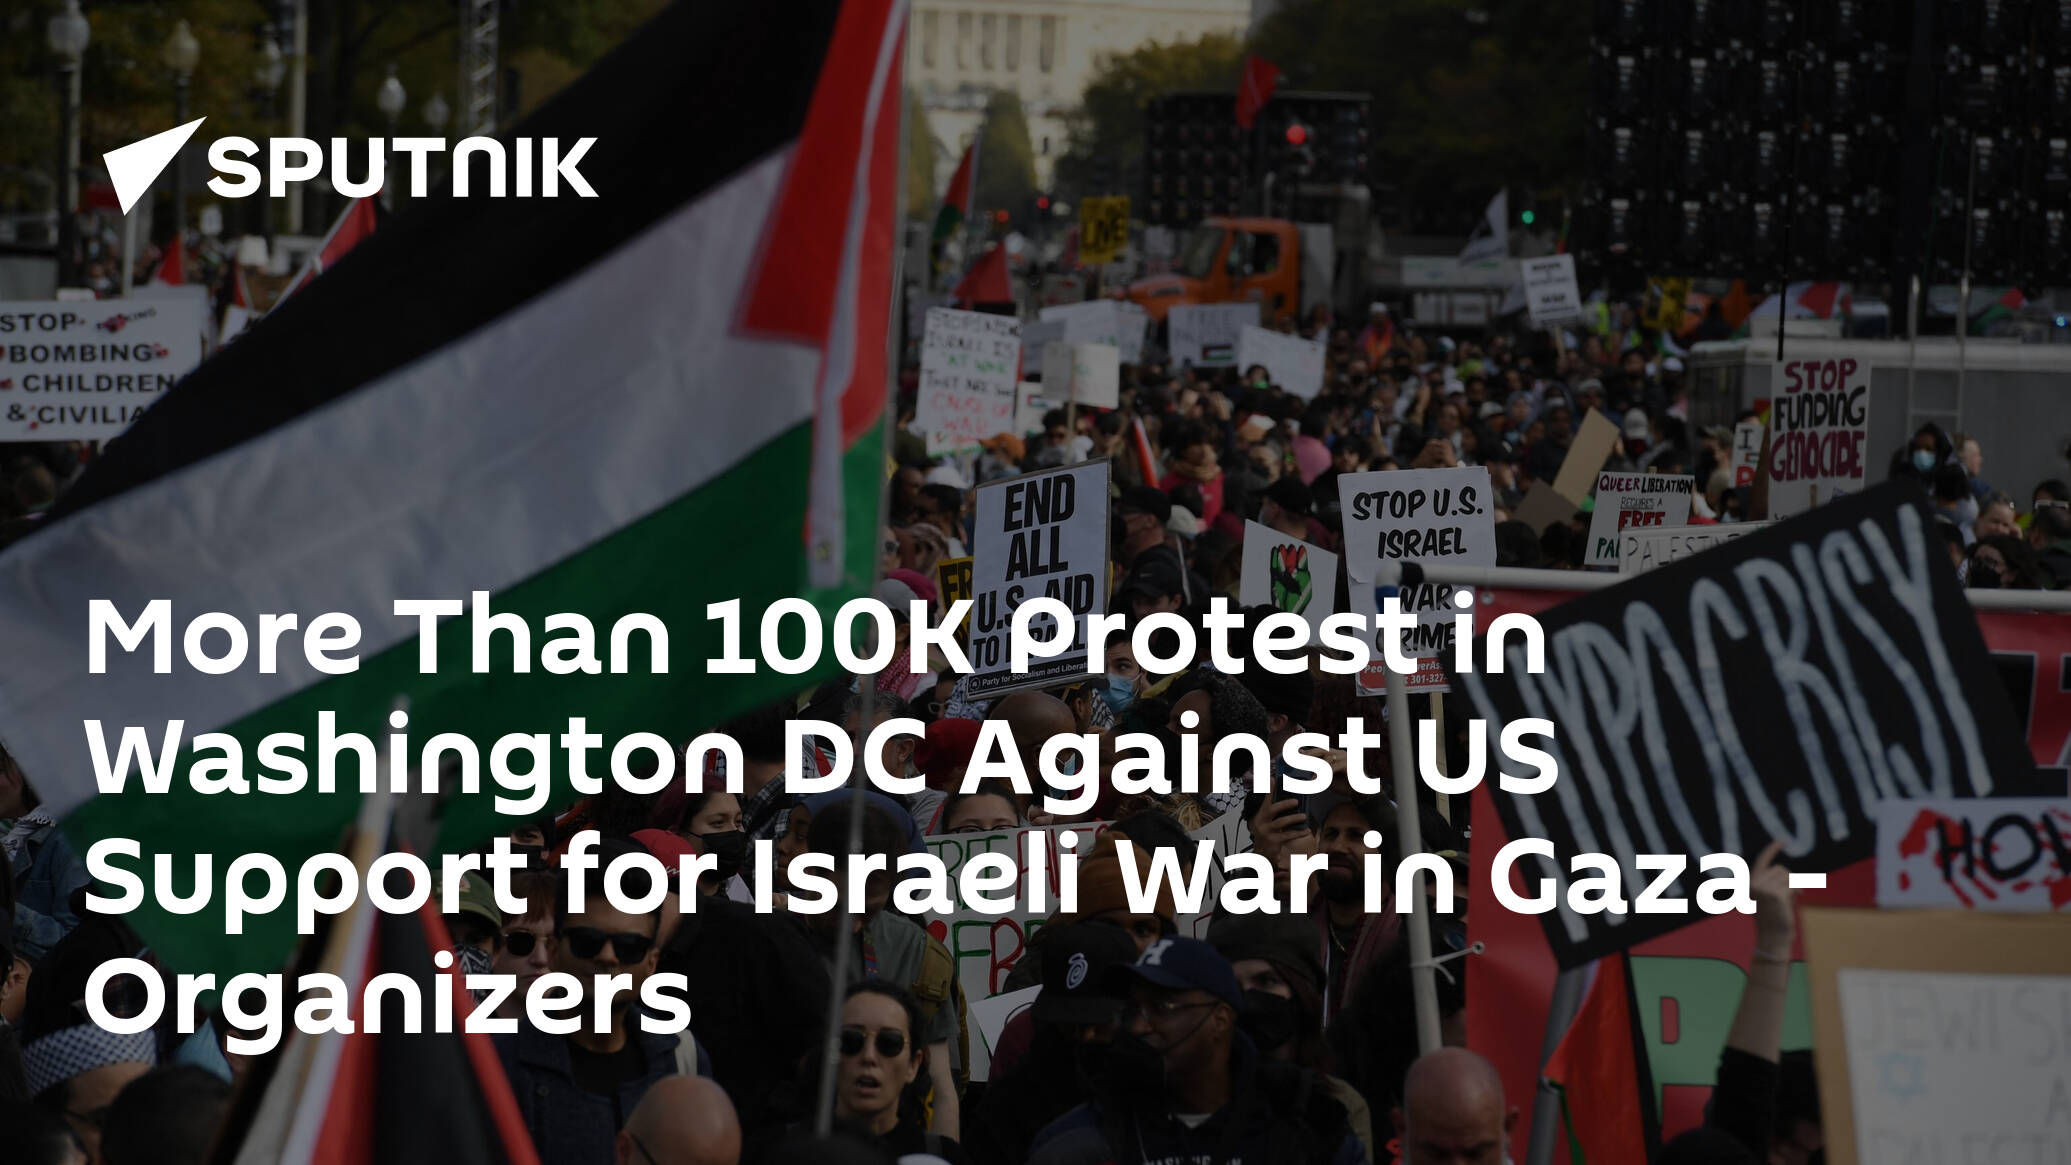 Thousands Protest in Washington Against US Support for Israeli War in Gaza